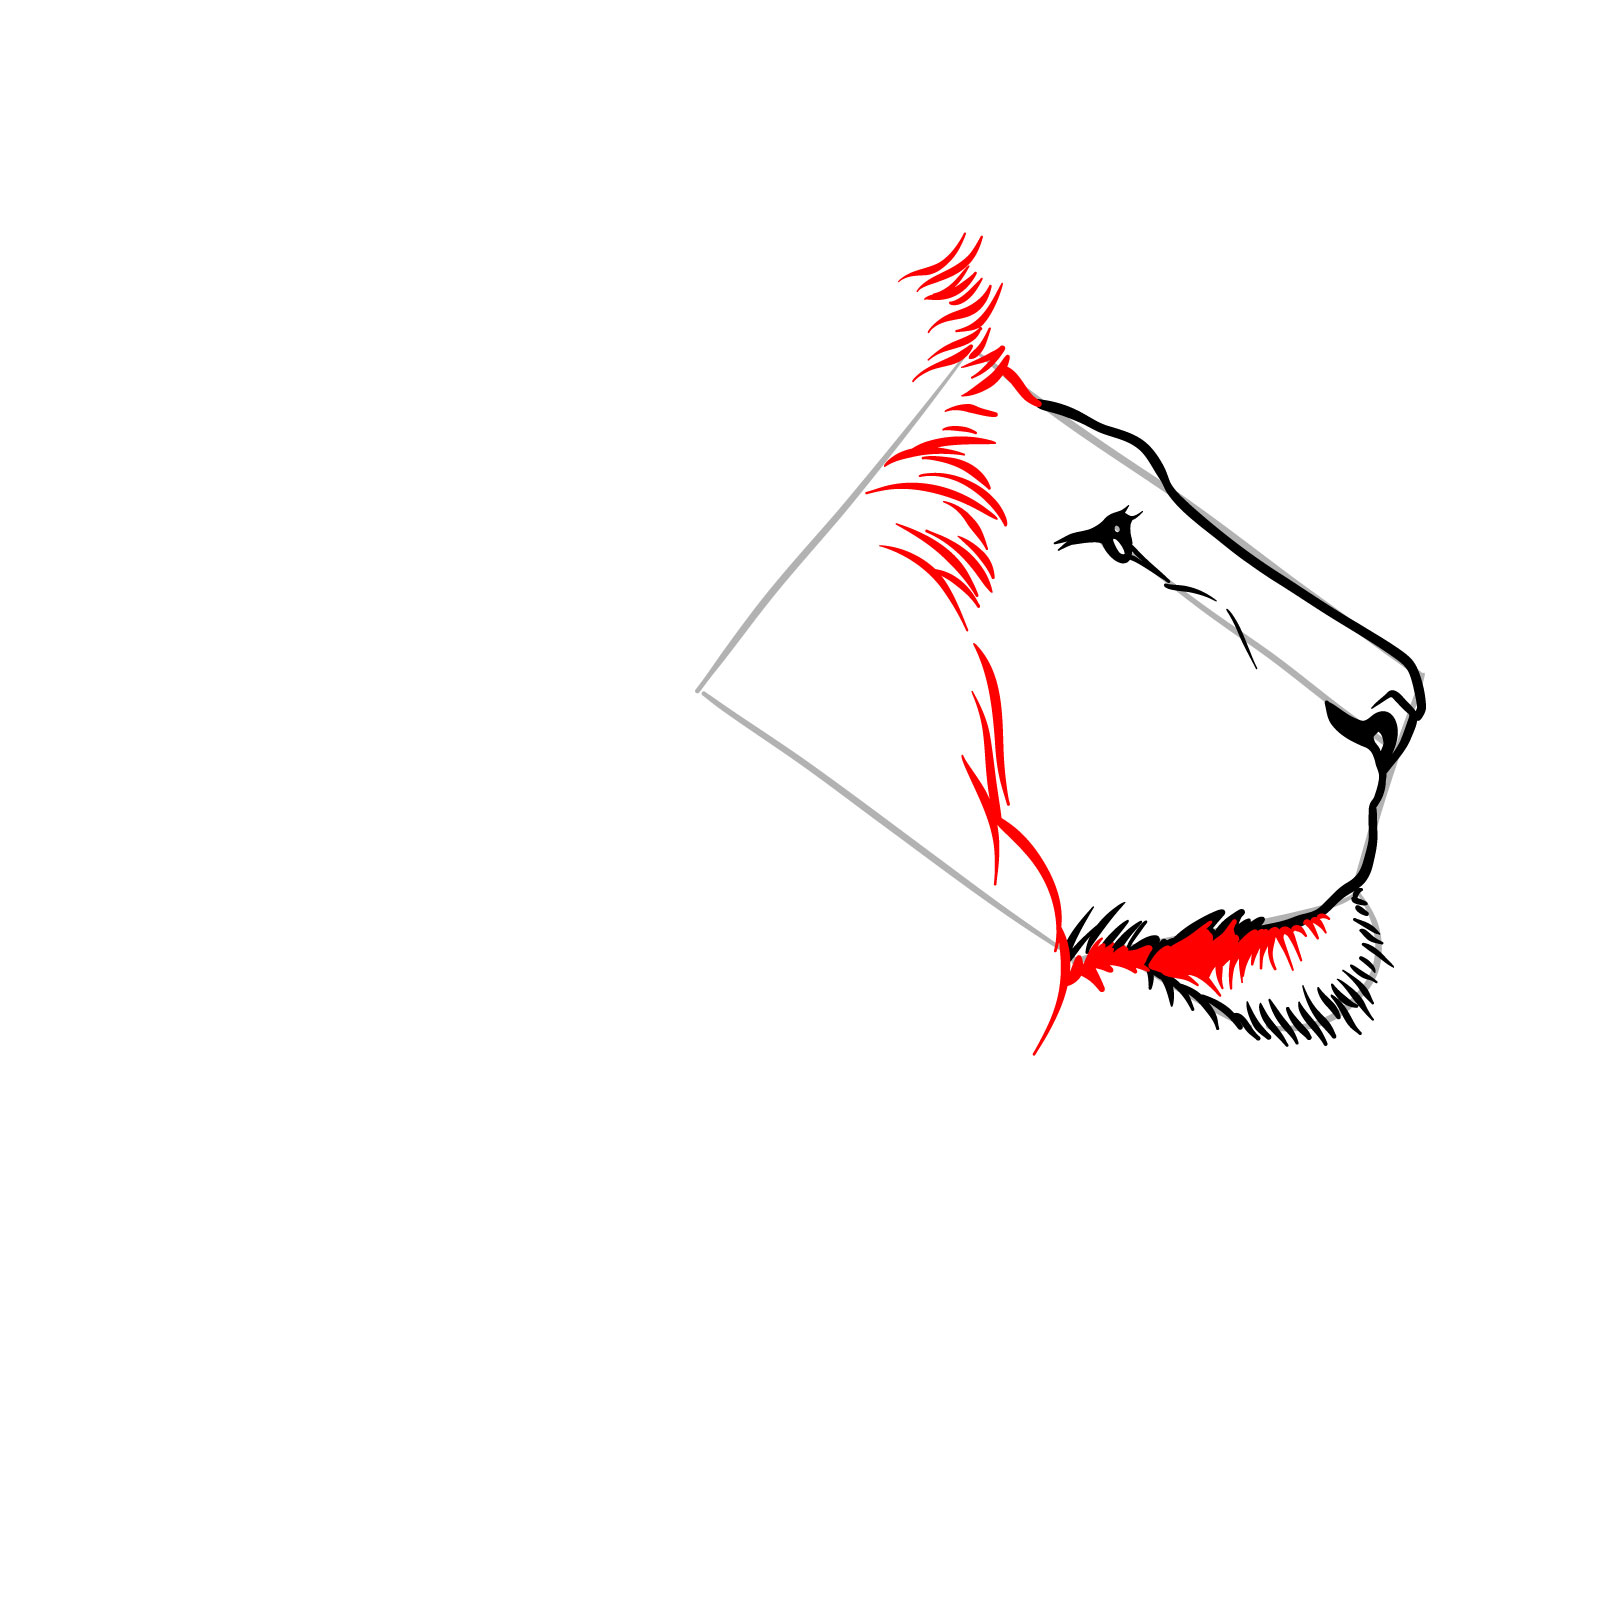 Adding fur texture to the face frame in a lion's head side view drawing - step 05